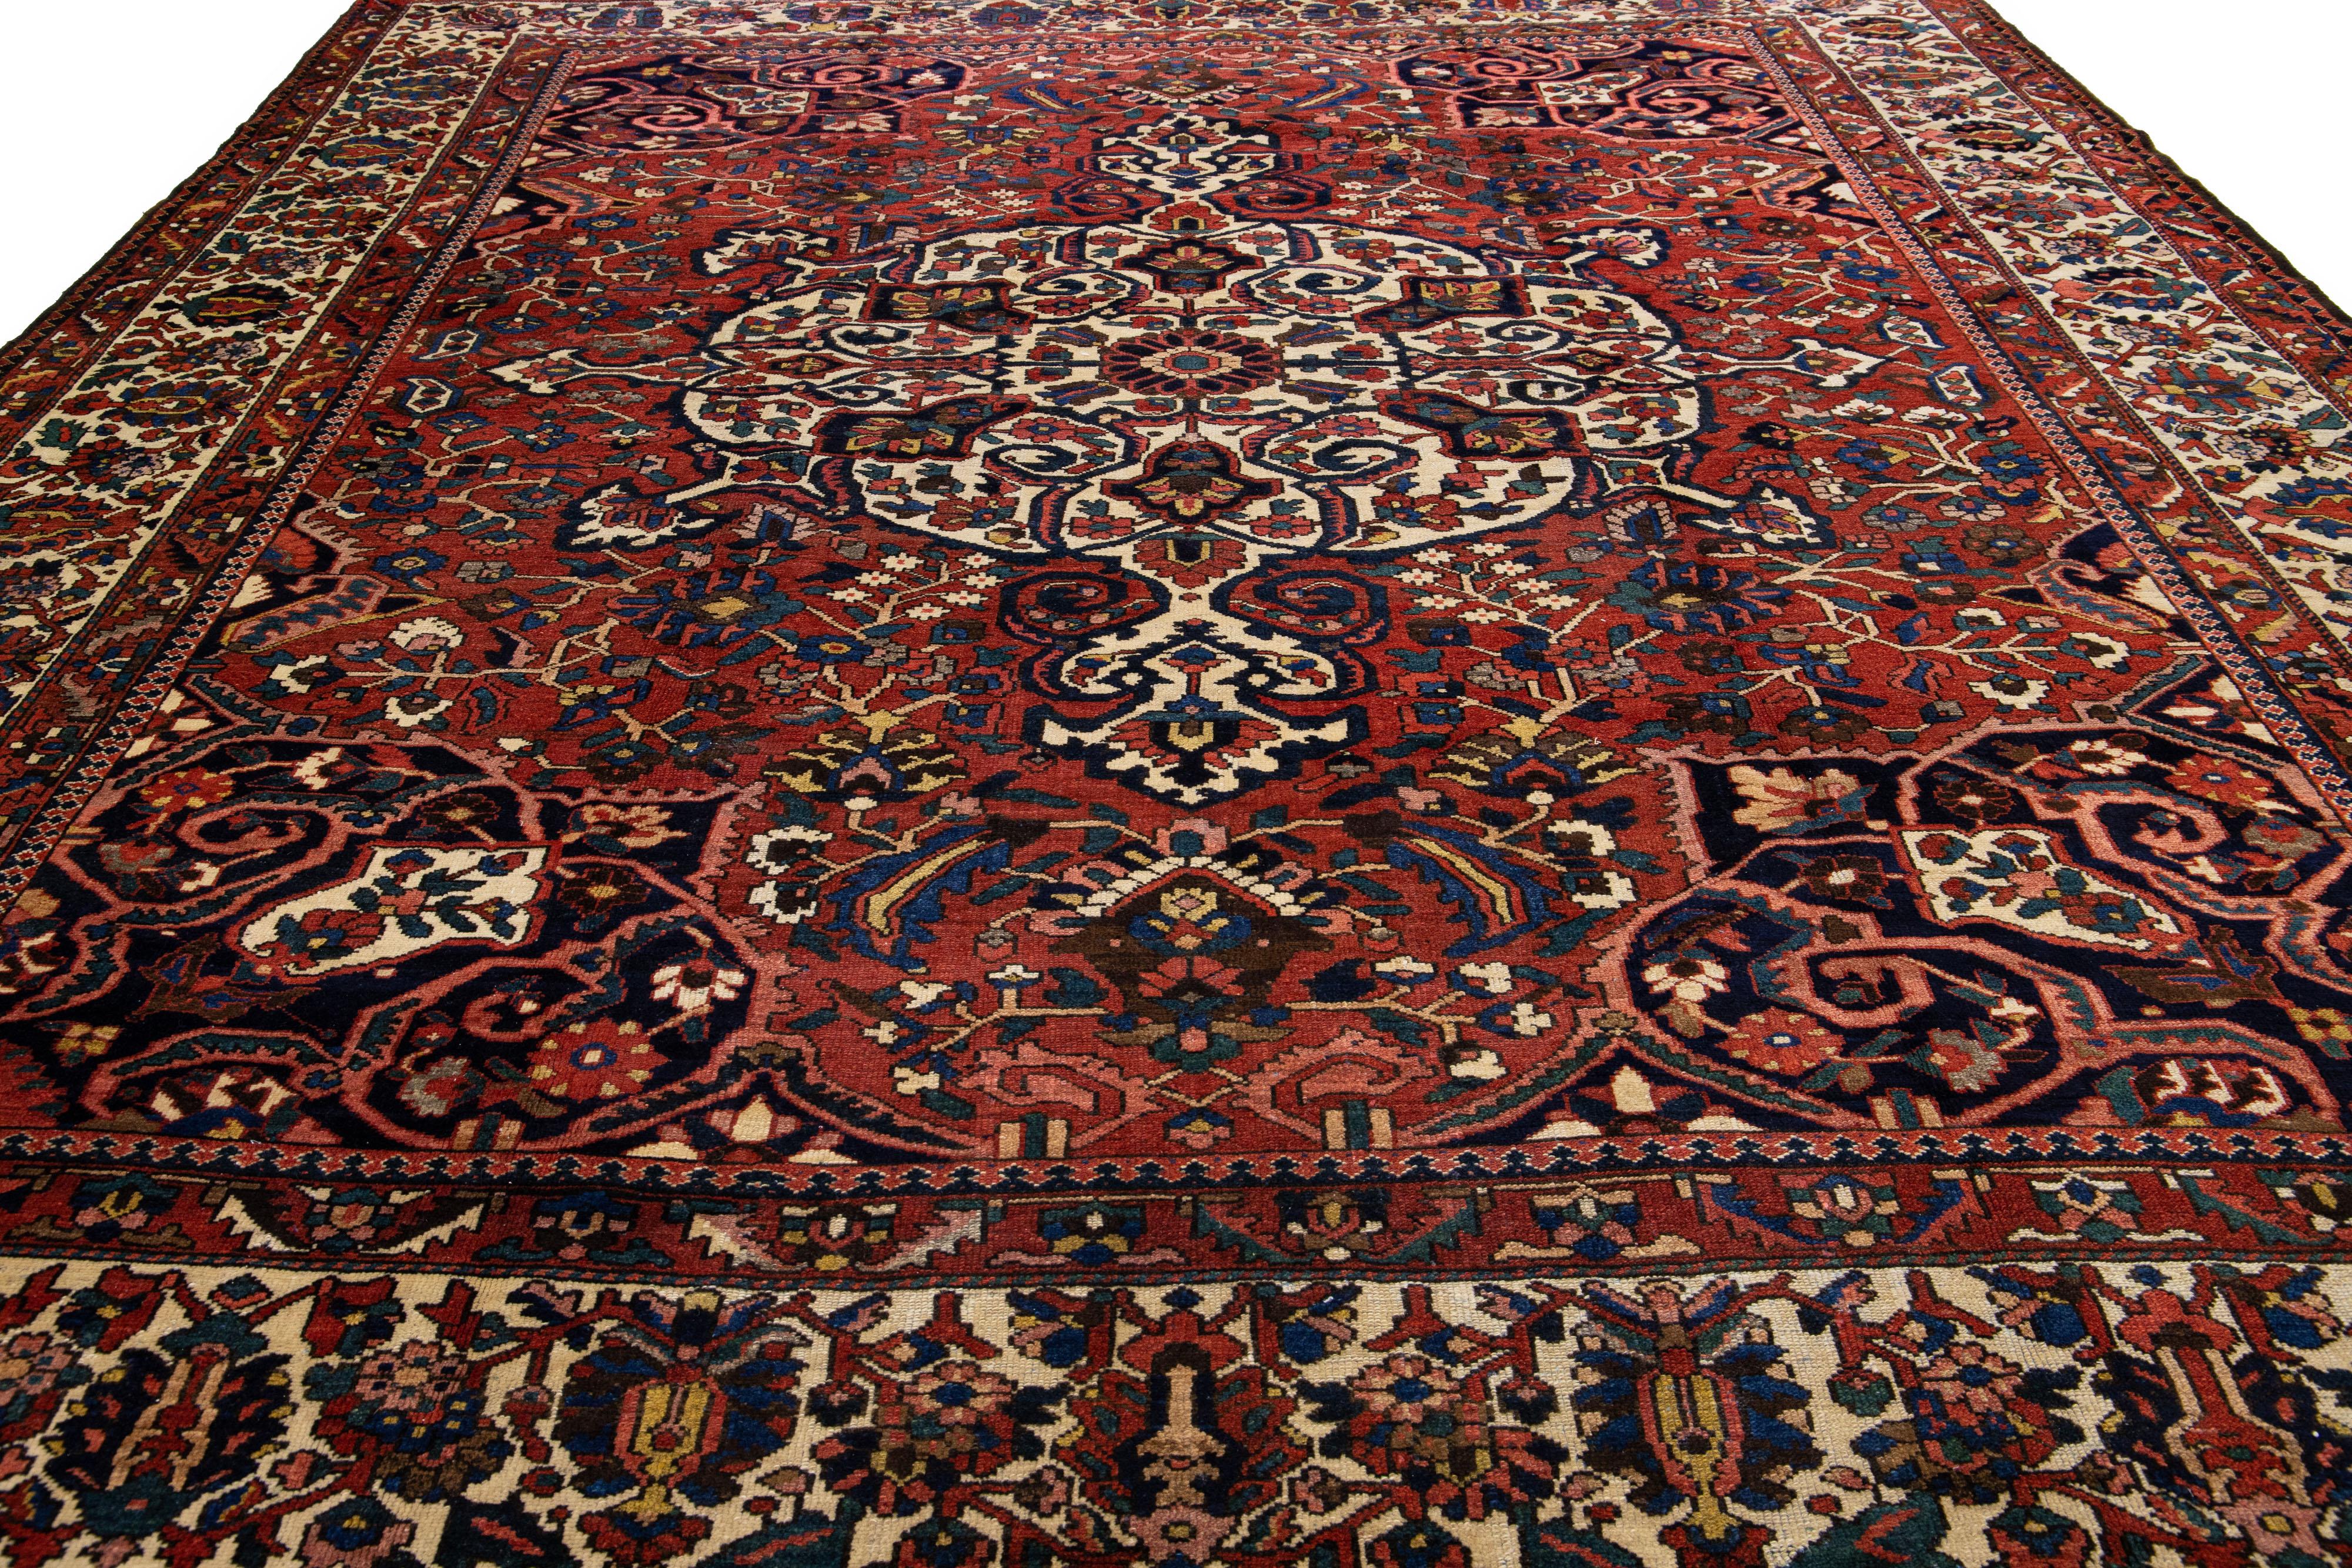 Beautiful Antique Bakhtiari hand-knotted wool rug with a red field. This Persian piece has an all-over multicolor accent in a gorgeous classic Medallion motif.

This rug measures 13'3